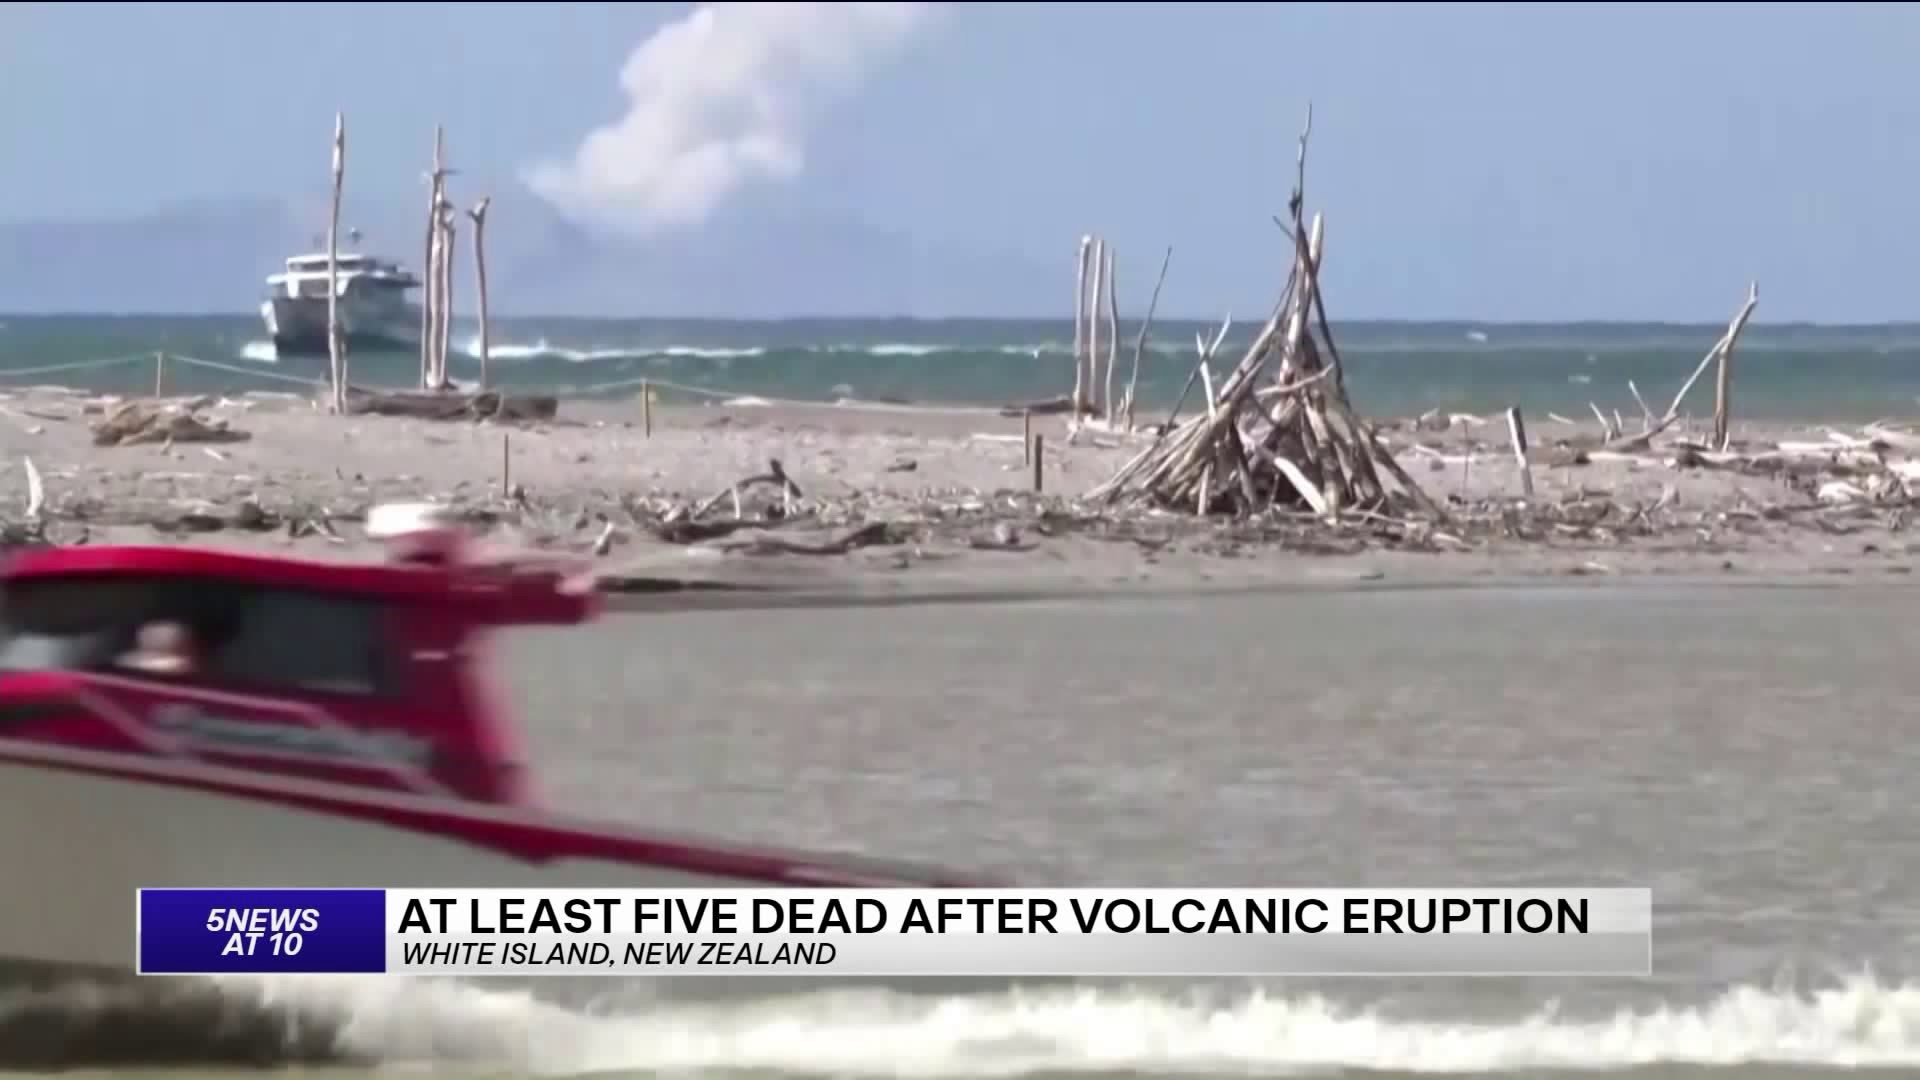 Up To 13 Feared Dead In Volcanic Eruption Off New Zealand